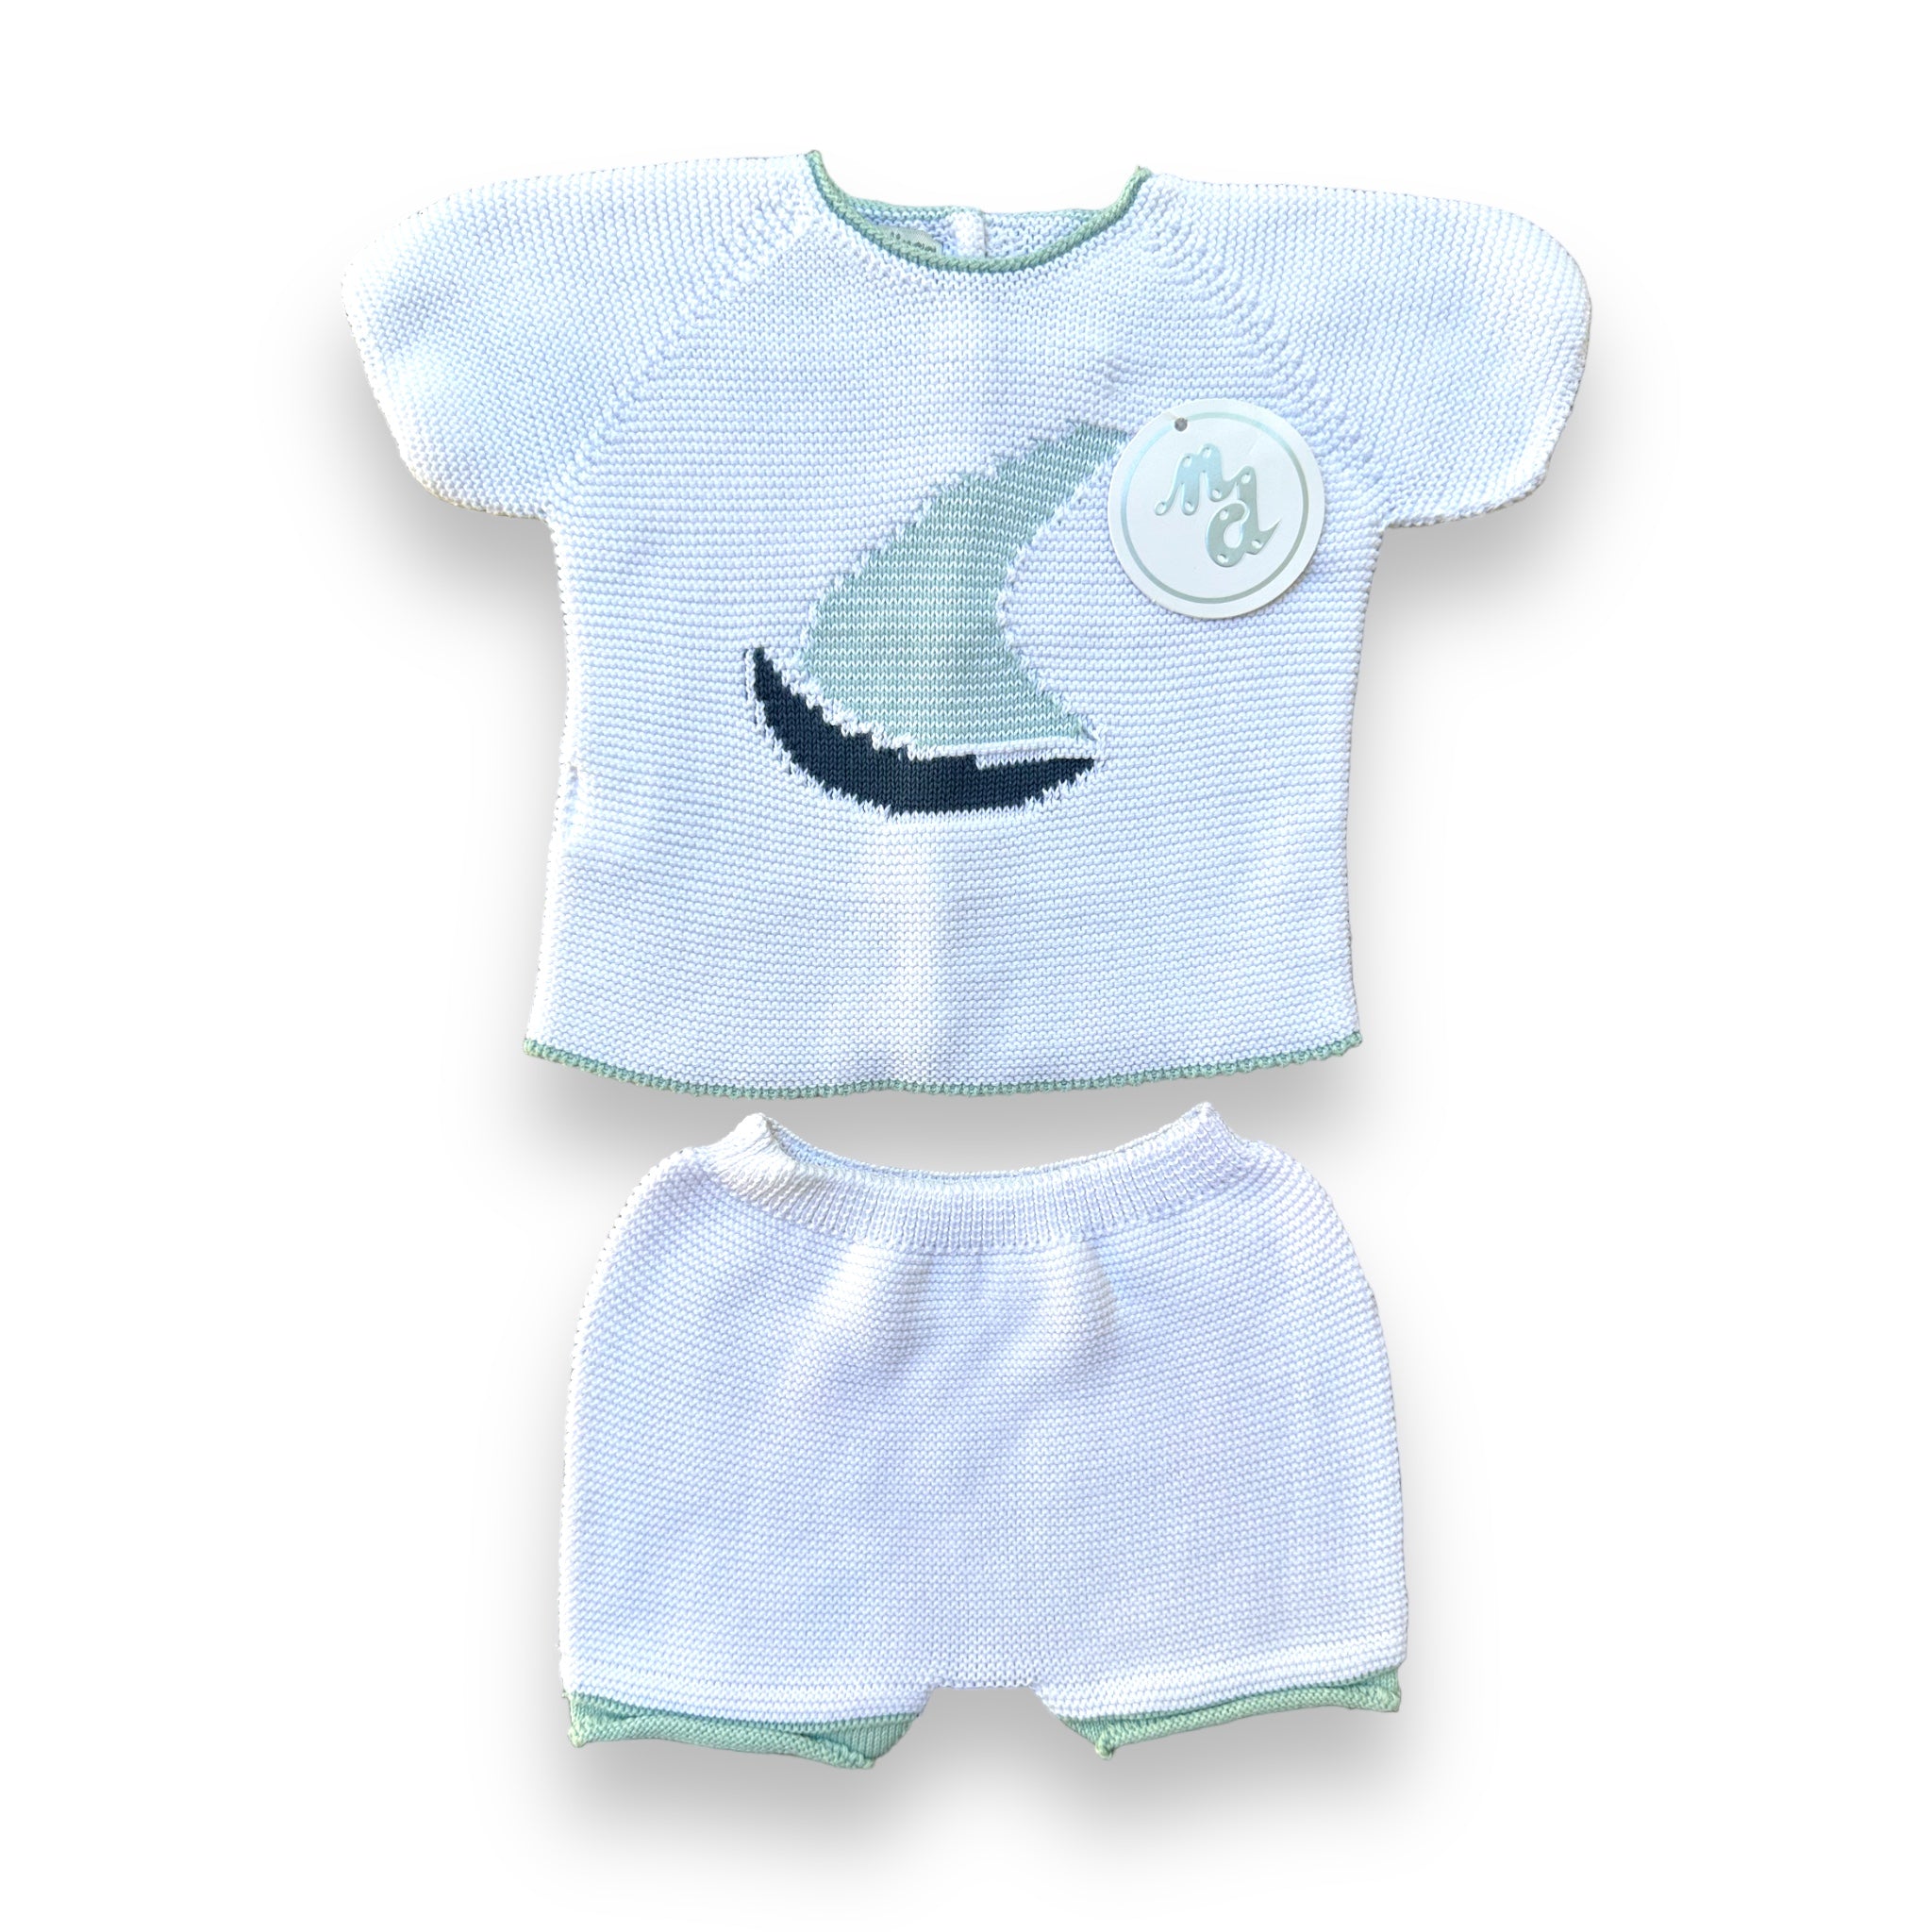 Outfit Barco- White/Turquoise